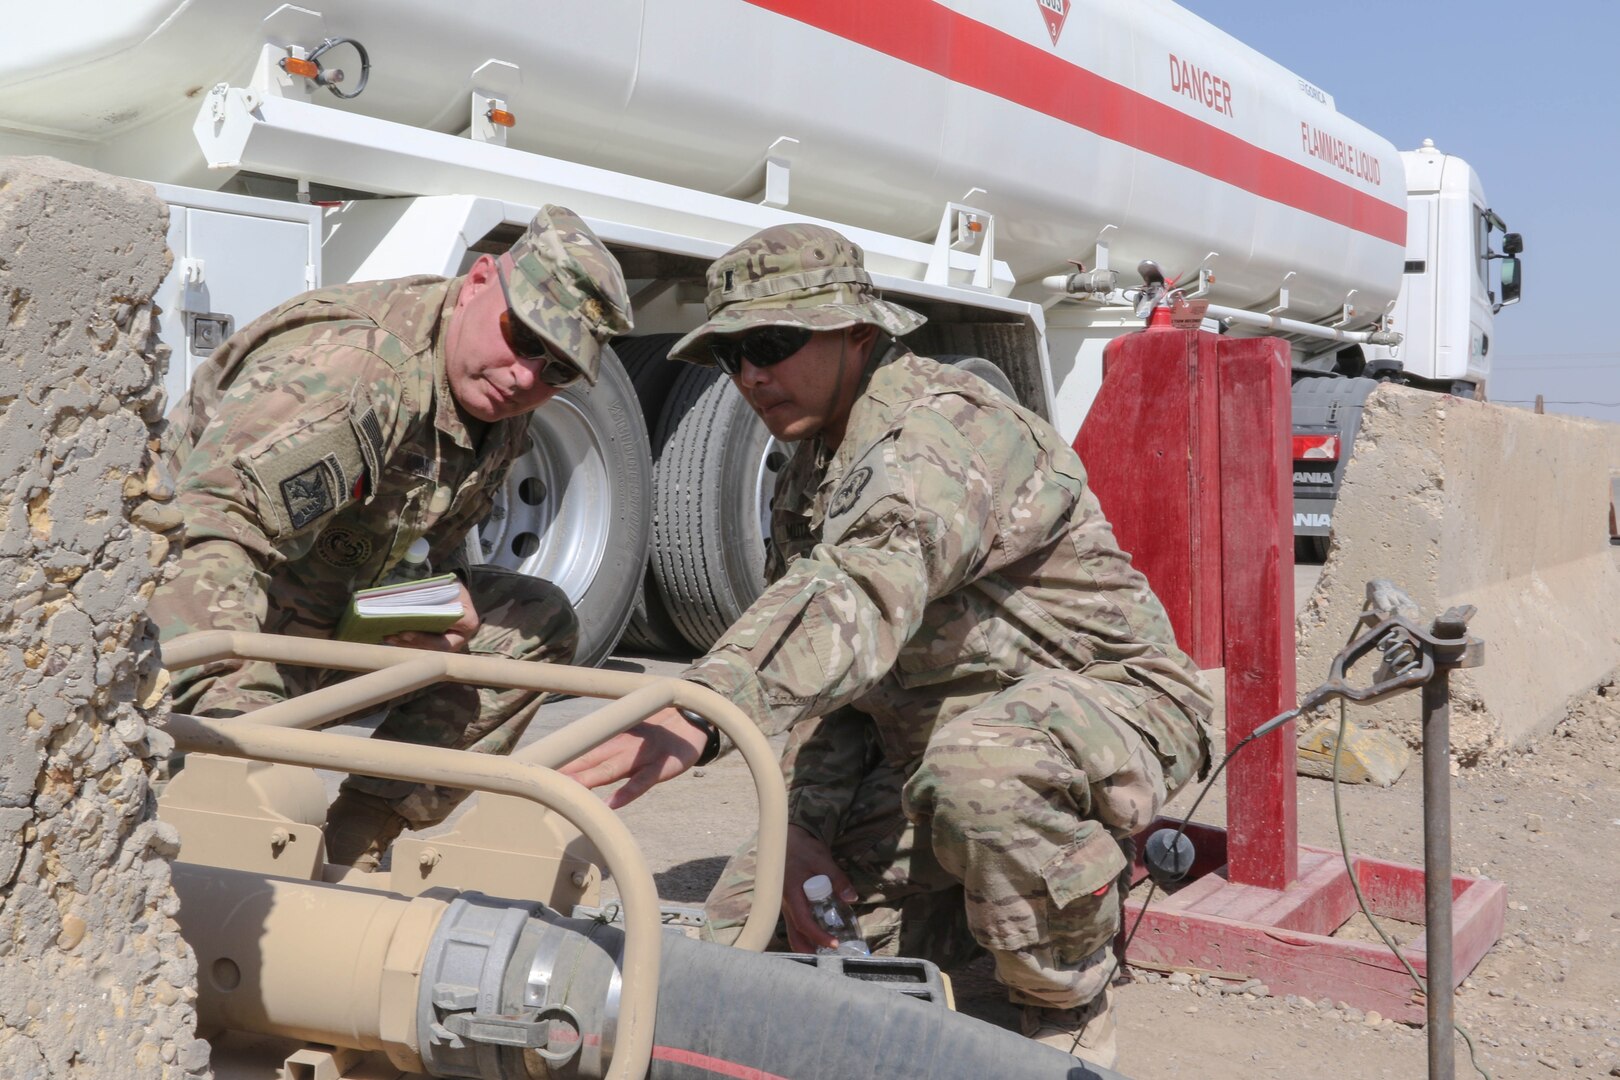 Maj. William Rozar, the deputy Inspector General for the 1st Theater Sustainment Command Operational Command Post, and 1st Lt. Brian Mutas, the petroleum operations officer for the Nevada National Guard’s 17th Sustainment Brigade, inspect the fuel gauge on a tanker truck downloading fuel at a forward operating base in Iraq, recently. U.S. Army Central uses forward logistical elements to maintain fuel farms under contract with U.S. Army logistical specialists called contract representatives to ensure the operations is being conducted to the Army standard. (U.S. Army photo by Sgt. Brandon Hubbard, USARCENT Public Affairs)